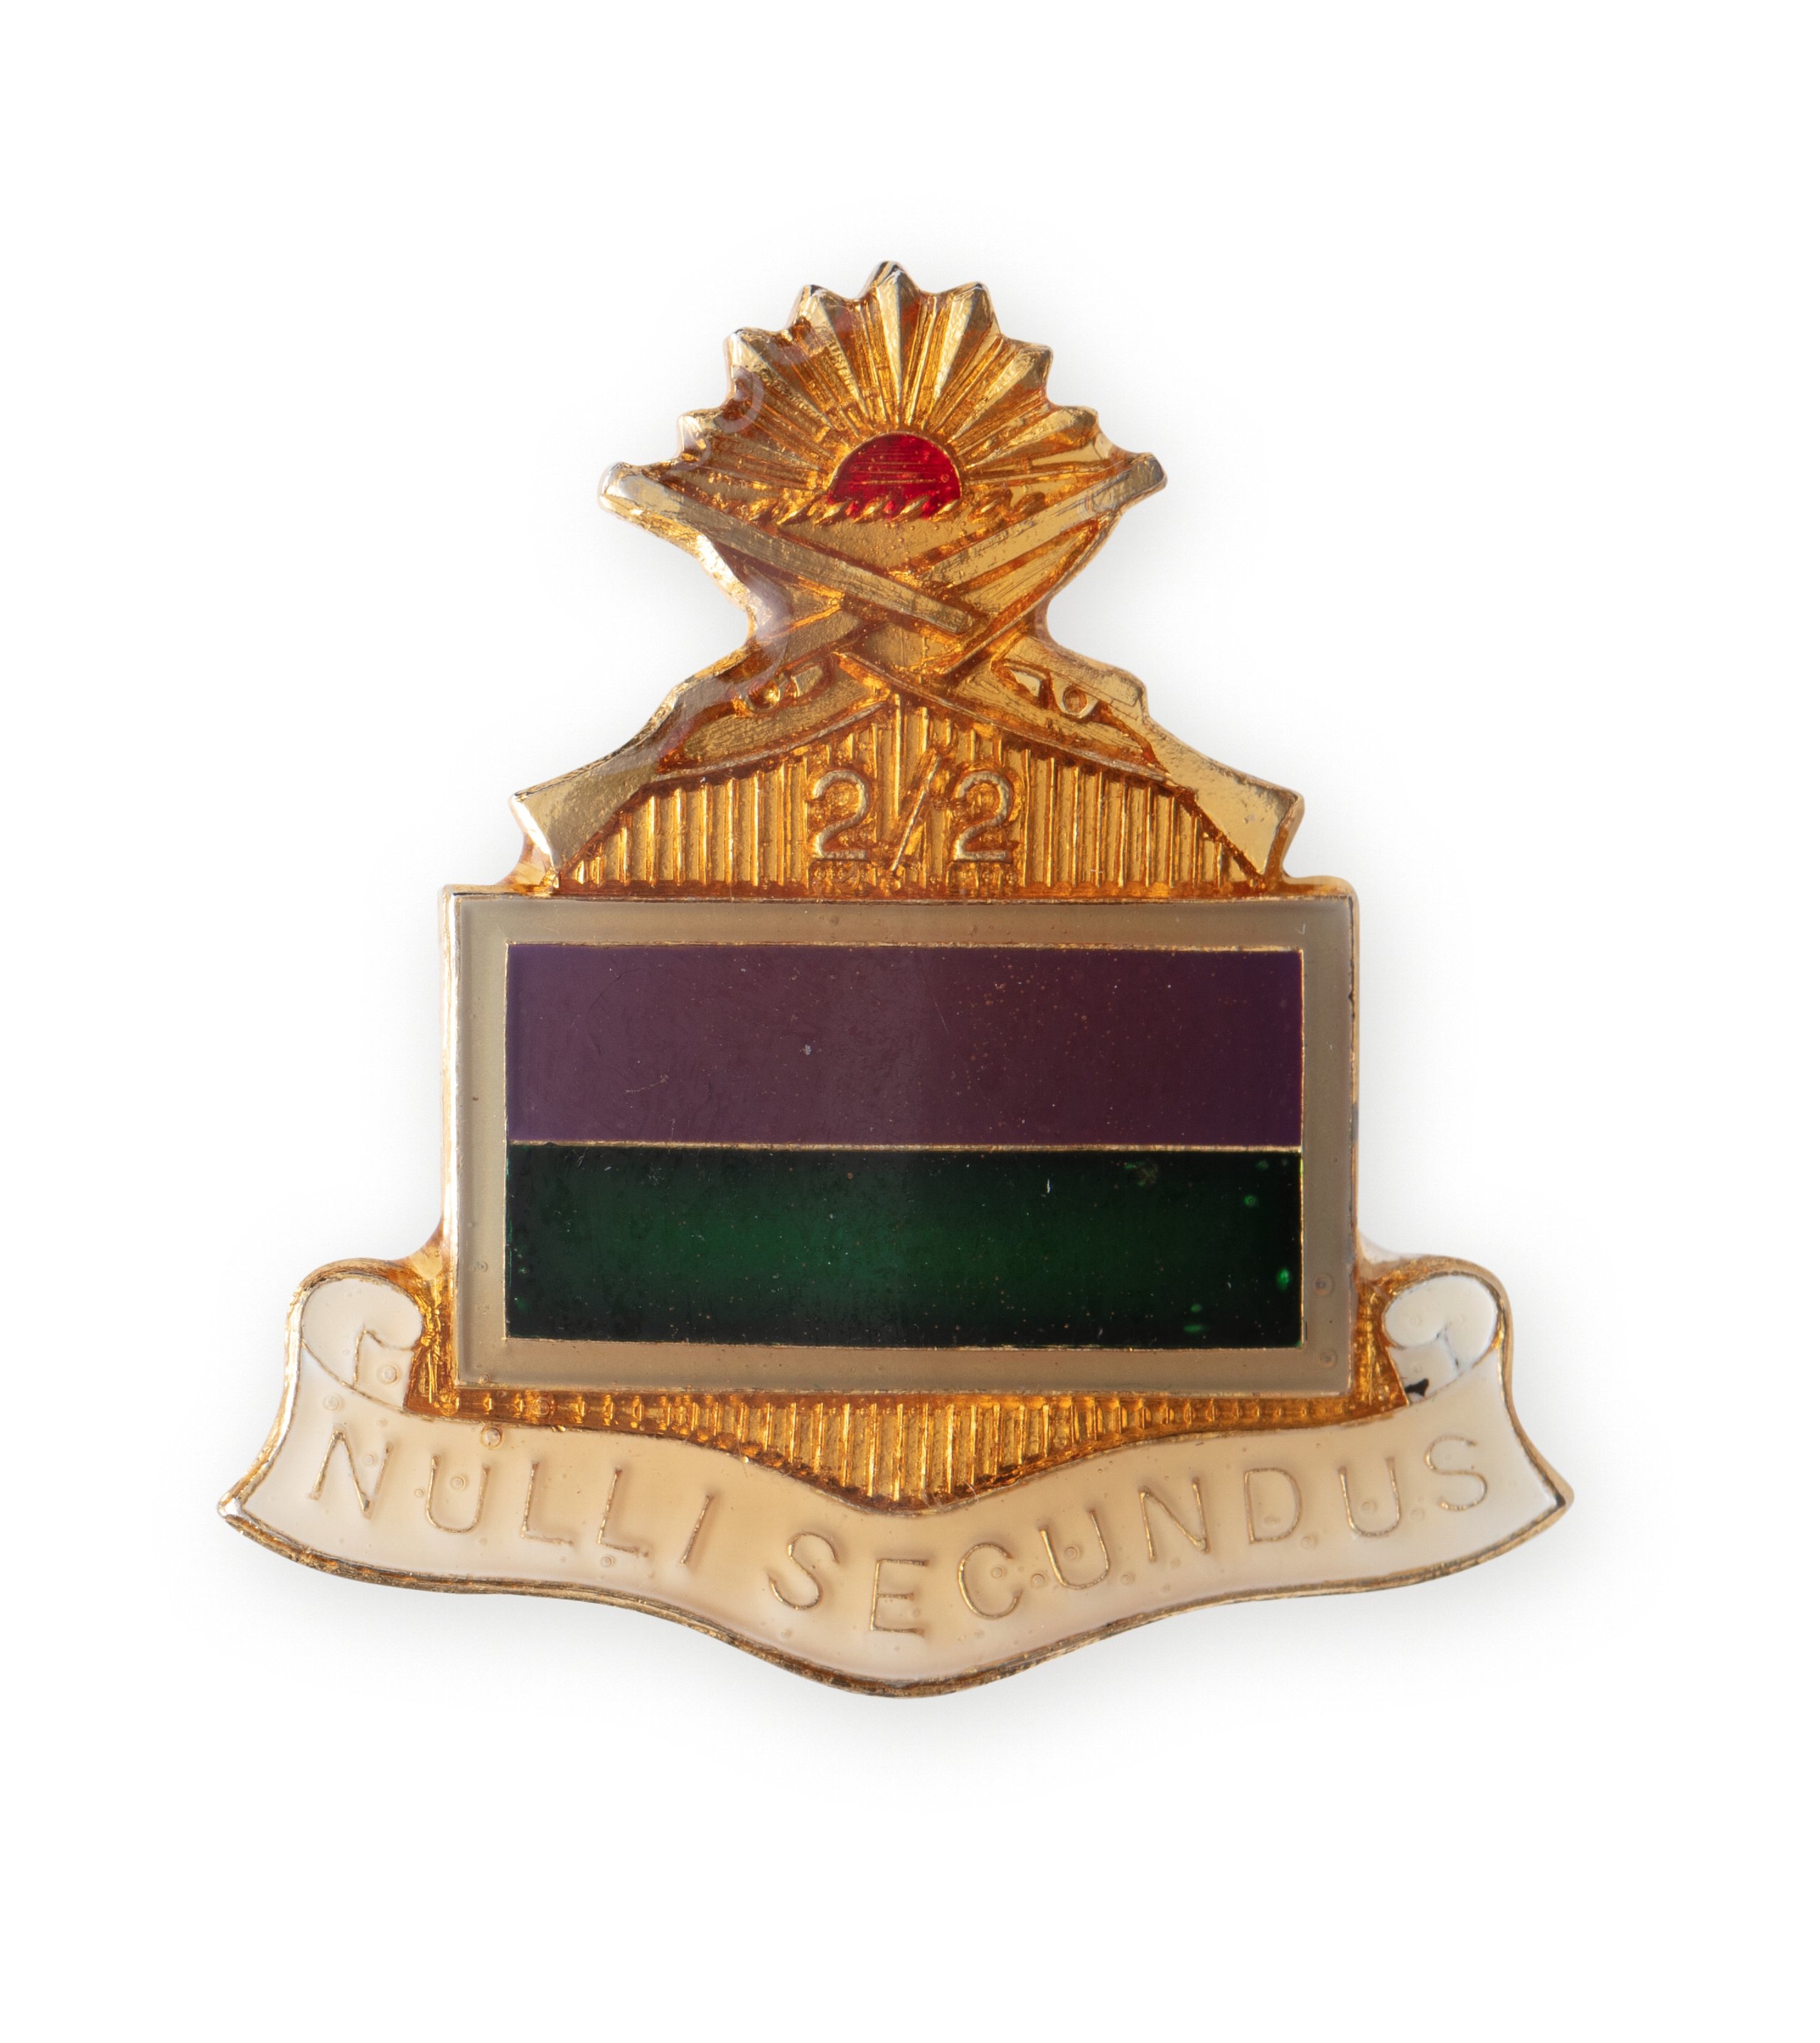 'Nulli Secundus' badge issued by Australian Imperial Force Association